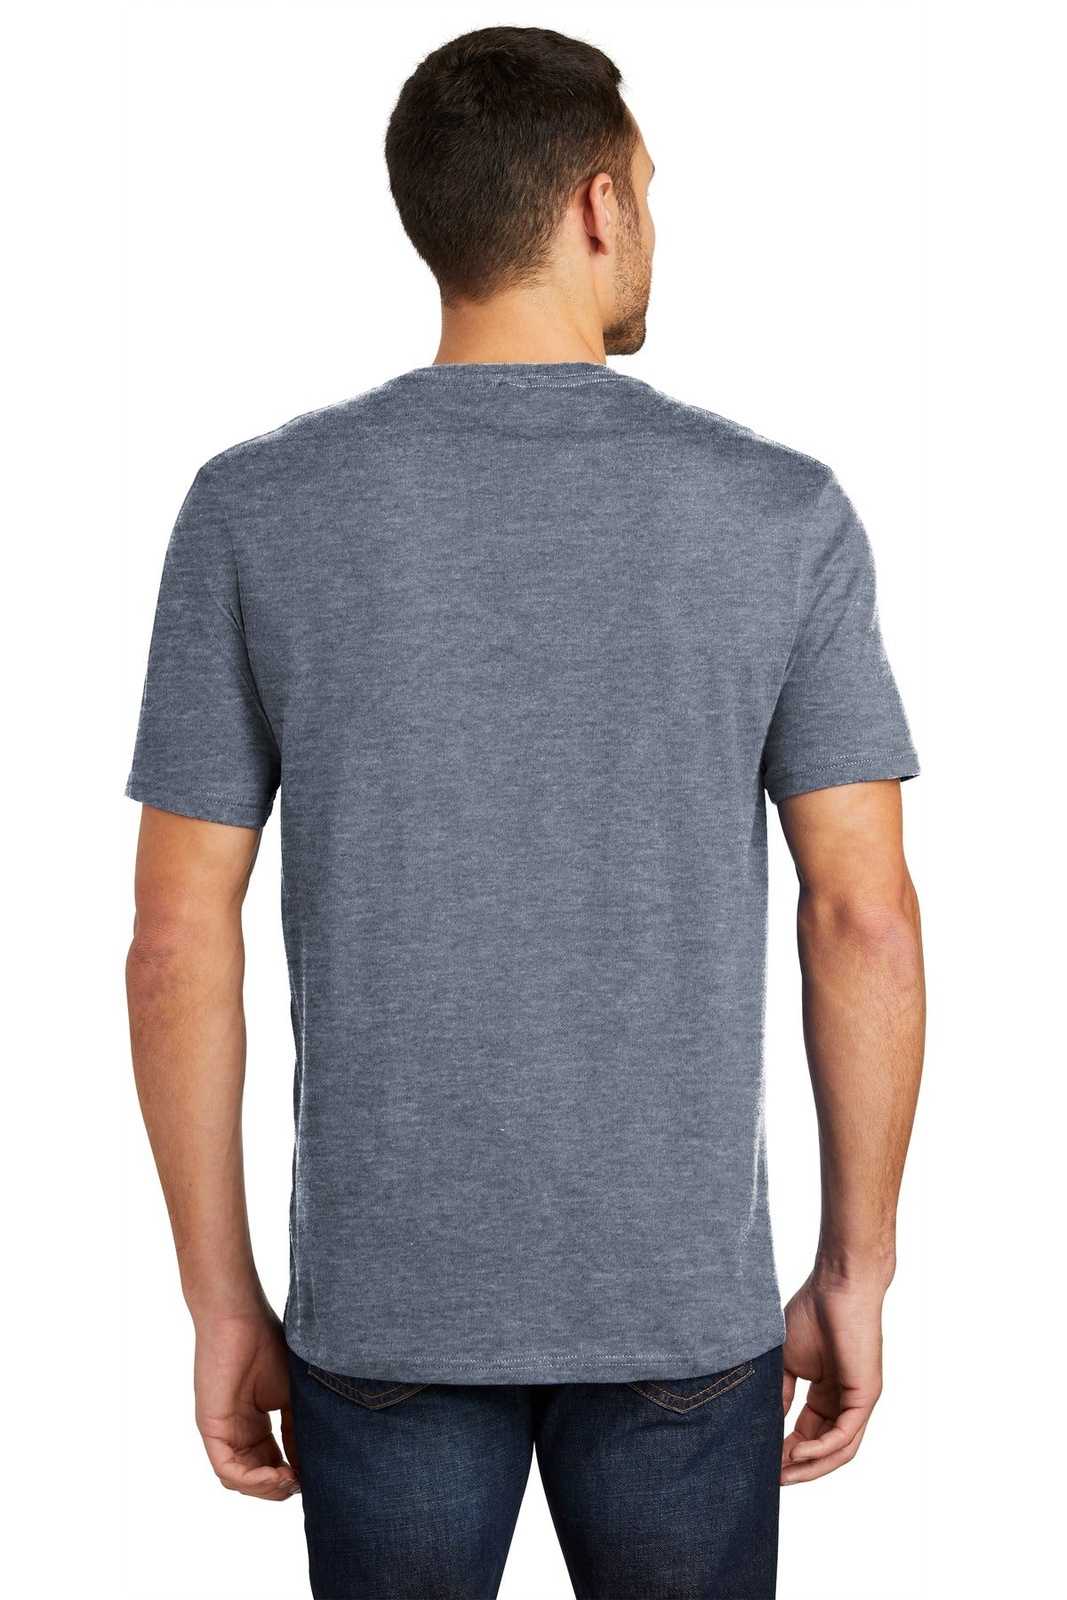 District DT104 Perfect Weight Tee - Heathered Navy - HIT a Double - 2